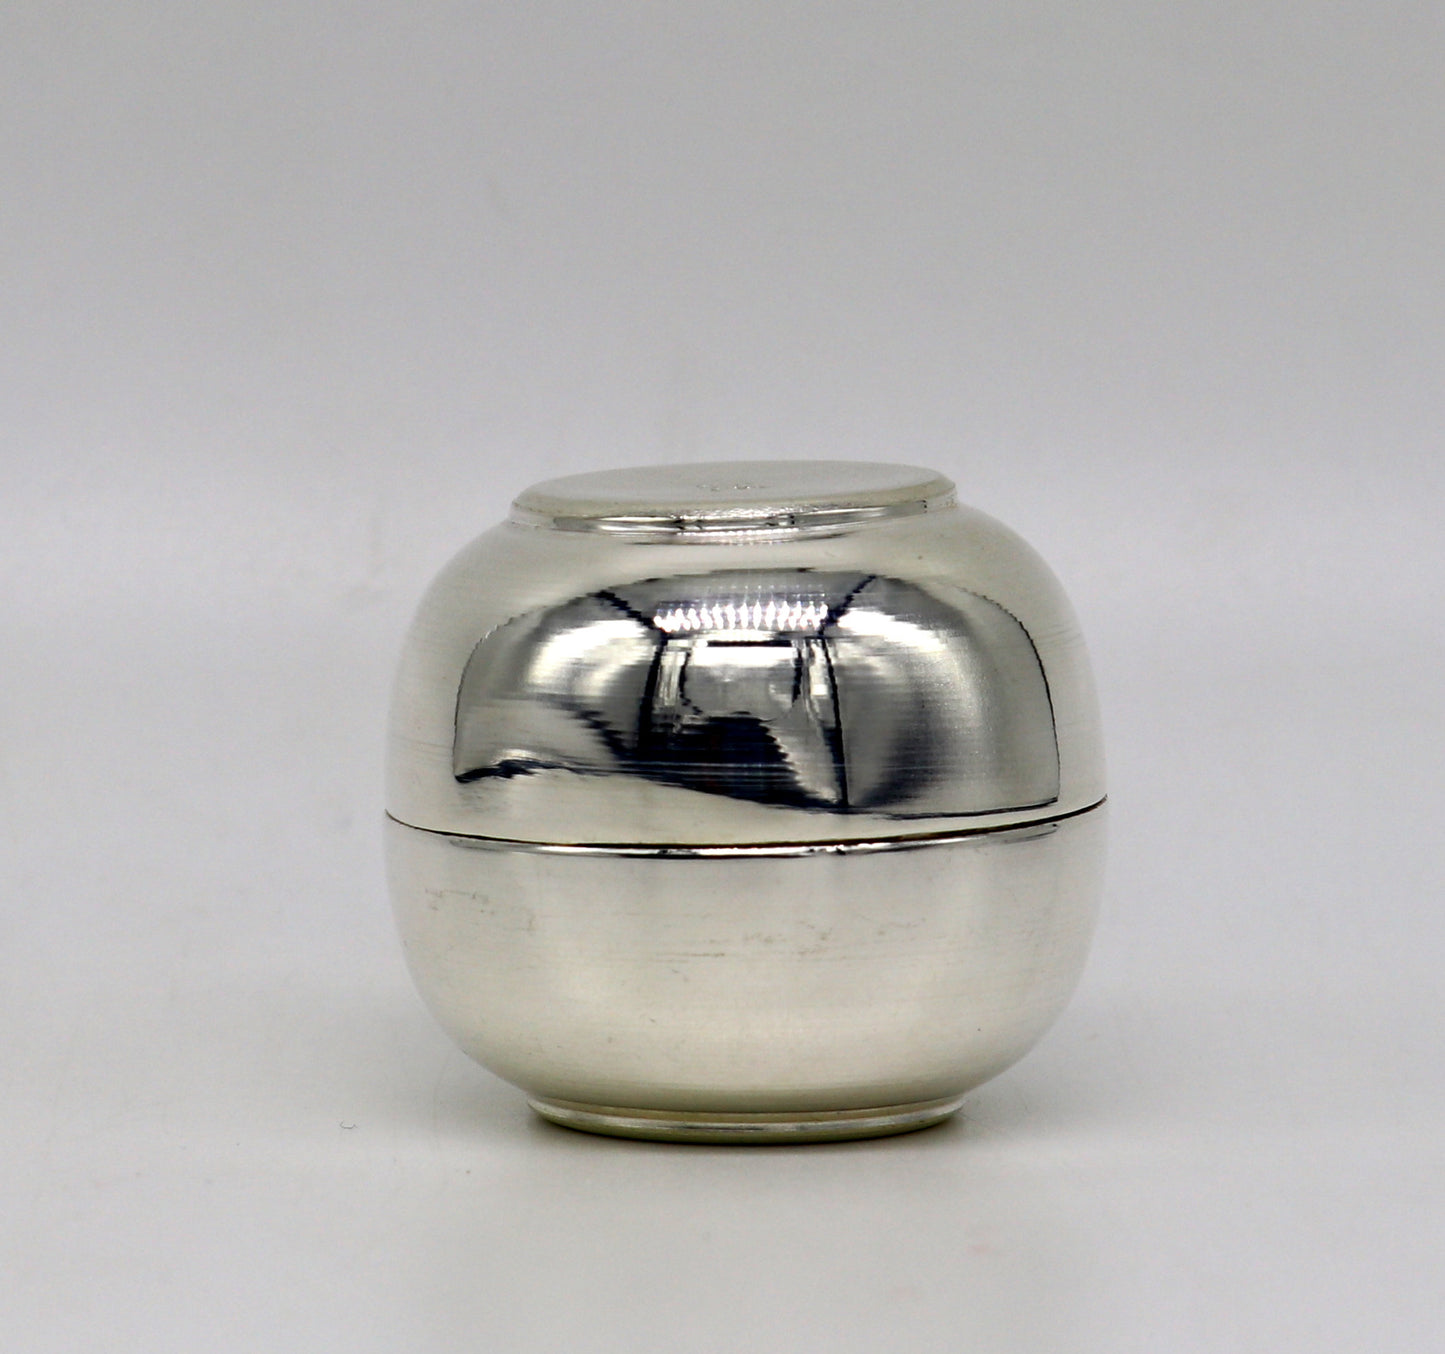 999 fine silver handmade gorgeous prasad box with cap, trinket box, container box, brides gifting, jewelry box, solid silver article stb95 - TRIBAL ORNAMENTS